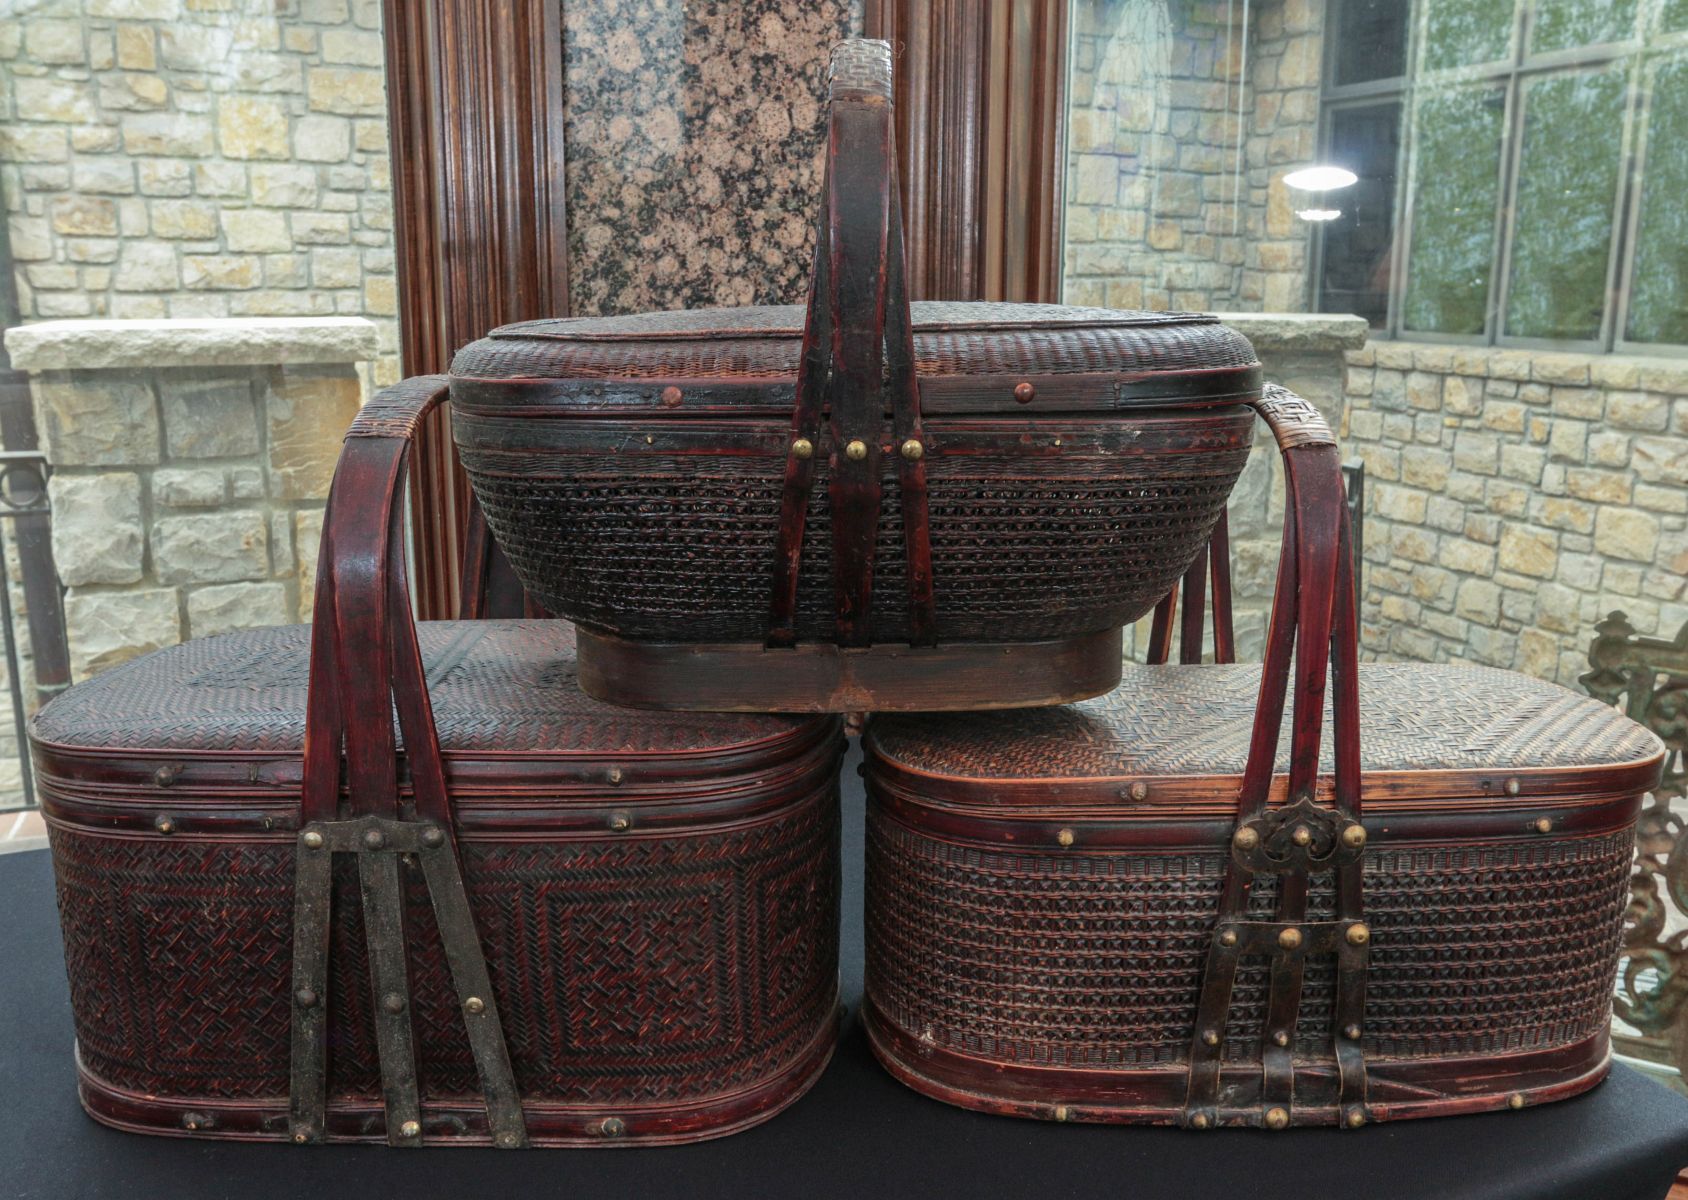 THREE ASIAN BASKETRY CONTAINERS WITH HANDLES